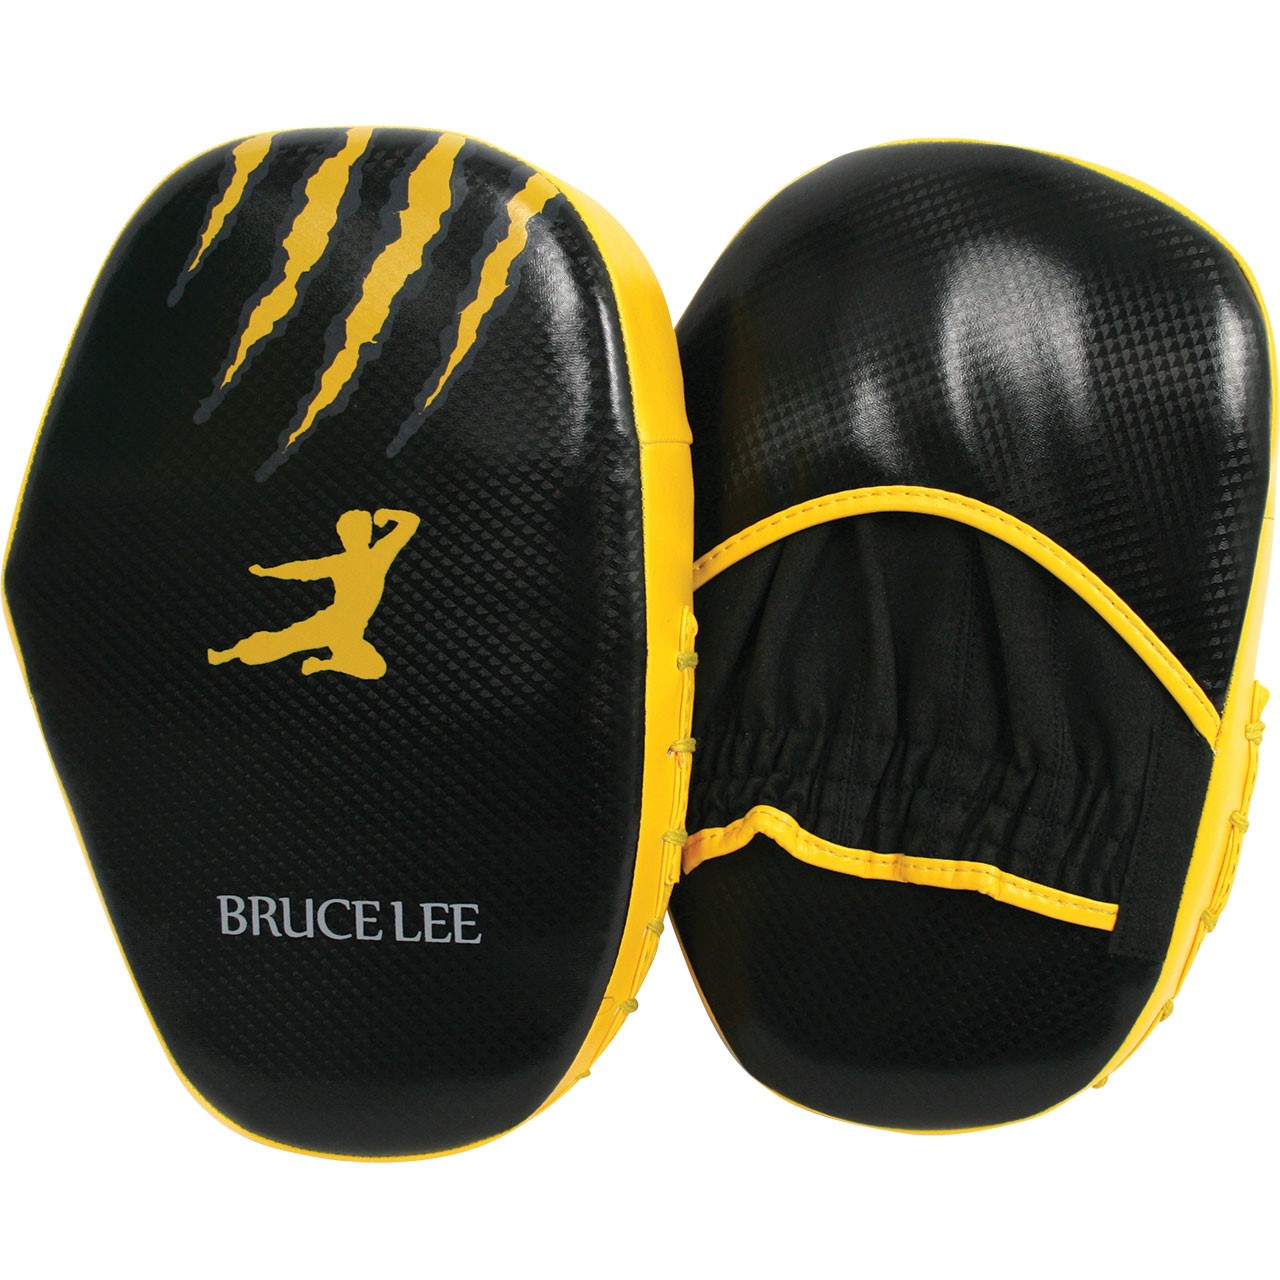 Bruce Lee Coaching Mitts